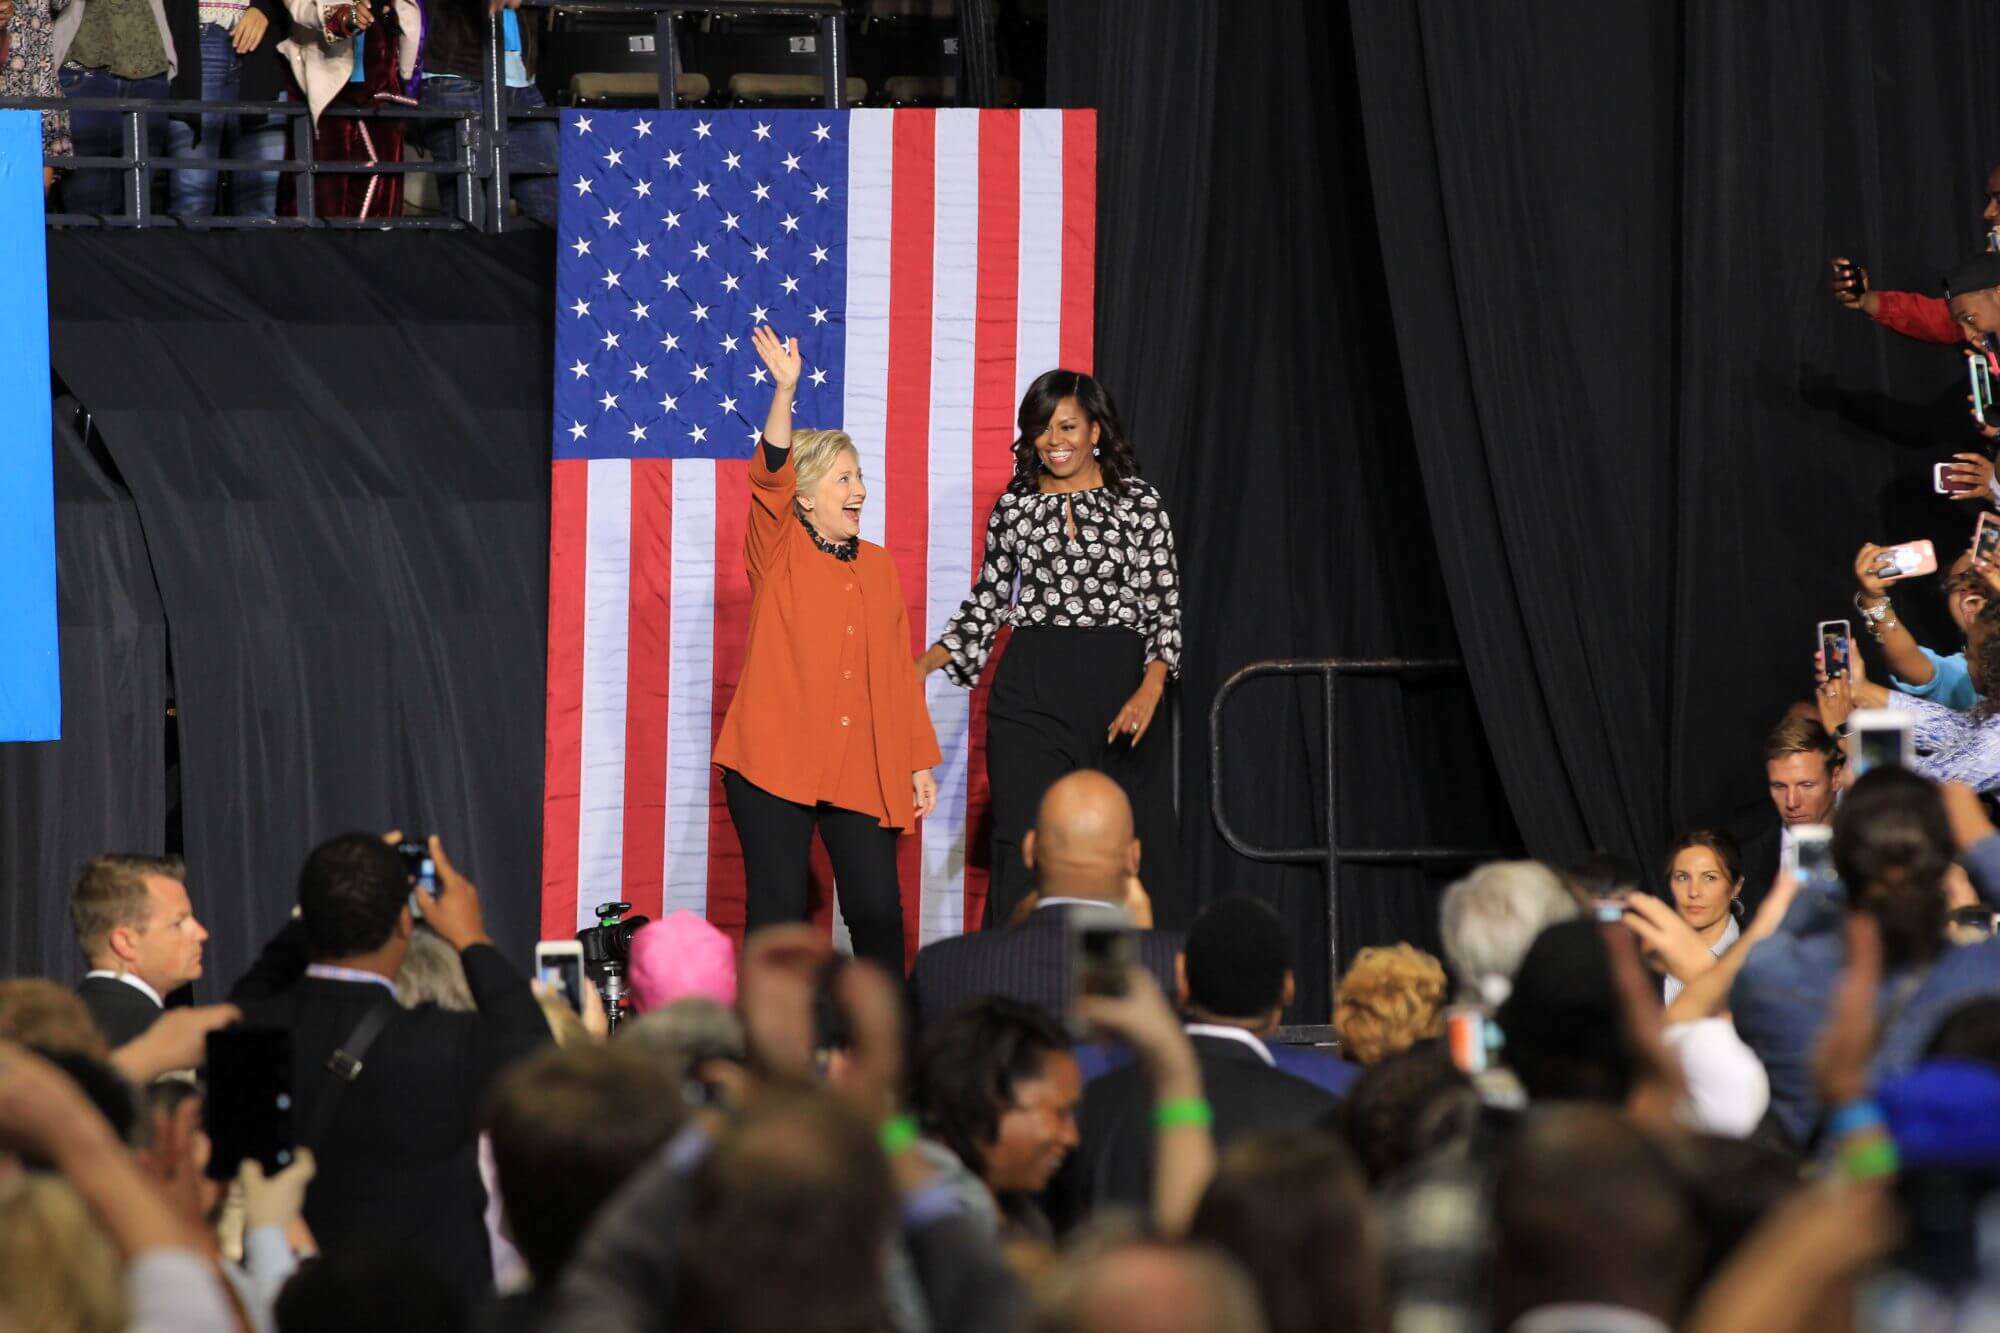 First lady Michelle Obama and Democratic presidential nominee Hillary Clinton take the stage to urge supporters to vote early and volunteer on Thursday in Winston-Salem, North Carolina.